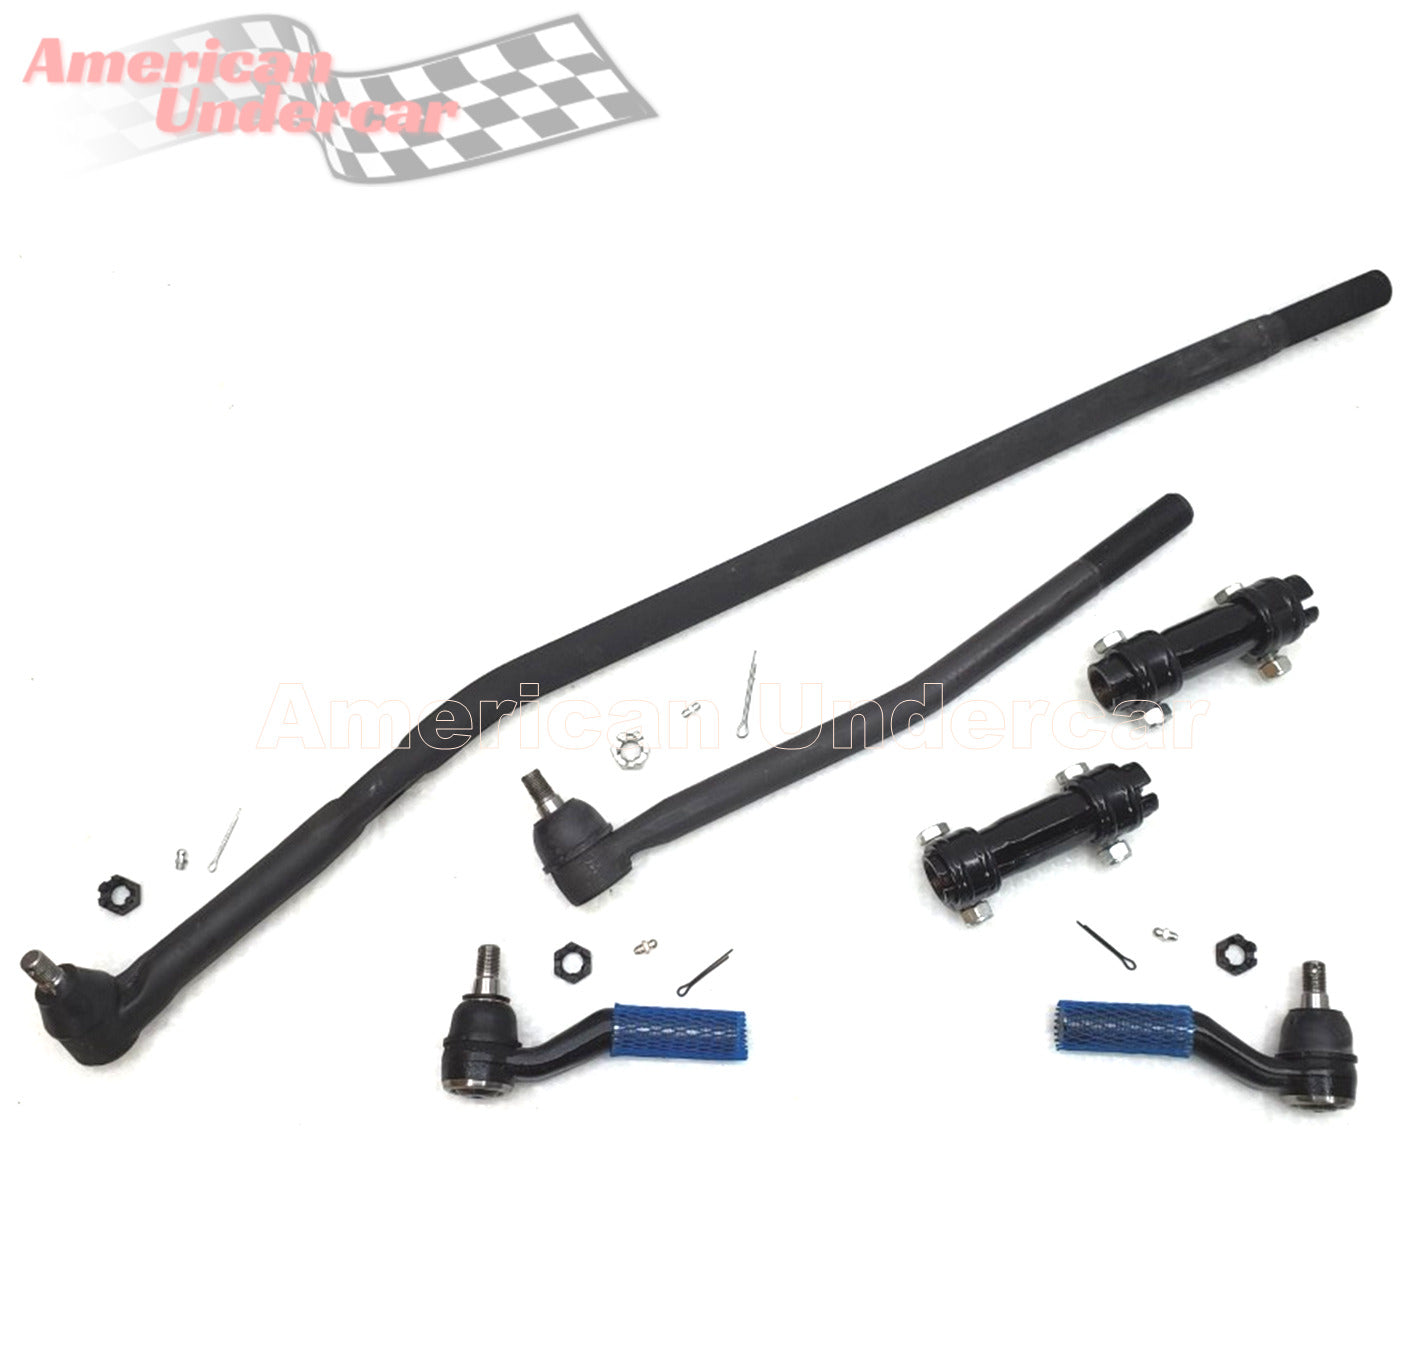 HD Drag Link Tie Rod Sleeve Steering Kit for 1992-2006 Ford E250 SRW